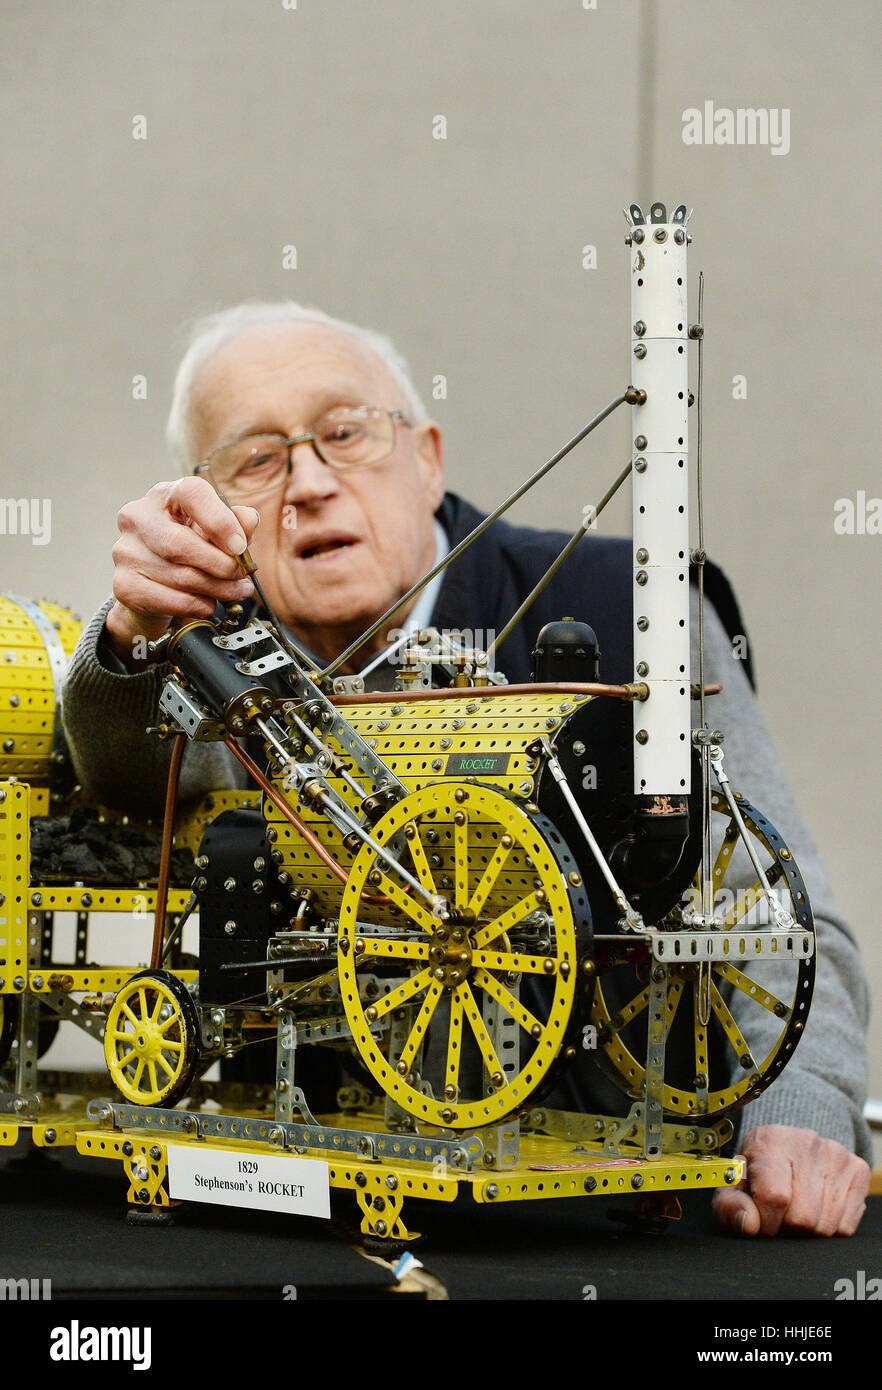 Colin Davies, 88, from Potters Bar in Hertfordshire, checks the fittings on his Meccano model of George Stephenson's Rocket ahead of the London Model Engineering exhibition held at Alexandra Palace, London, between Friday January 20 and Sunday January 22. Stock Photo